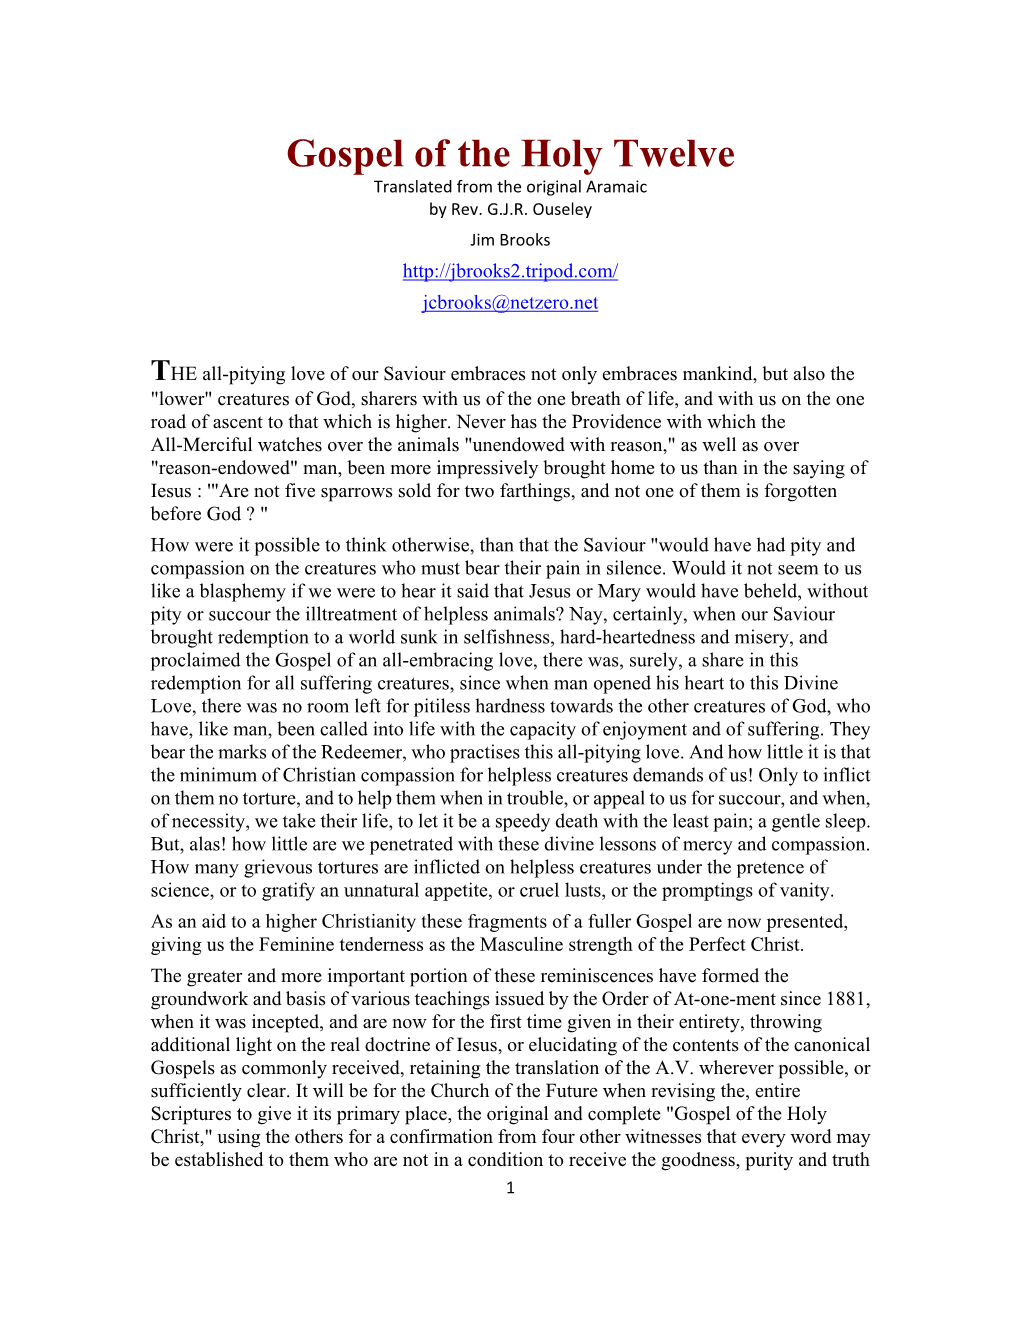 Gospel of the Holy Twelve Translated from the Original Aramaic by Rev